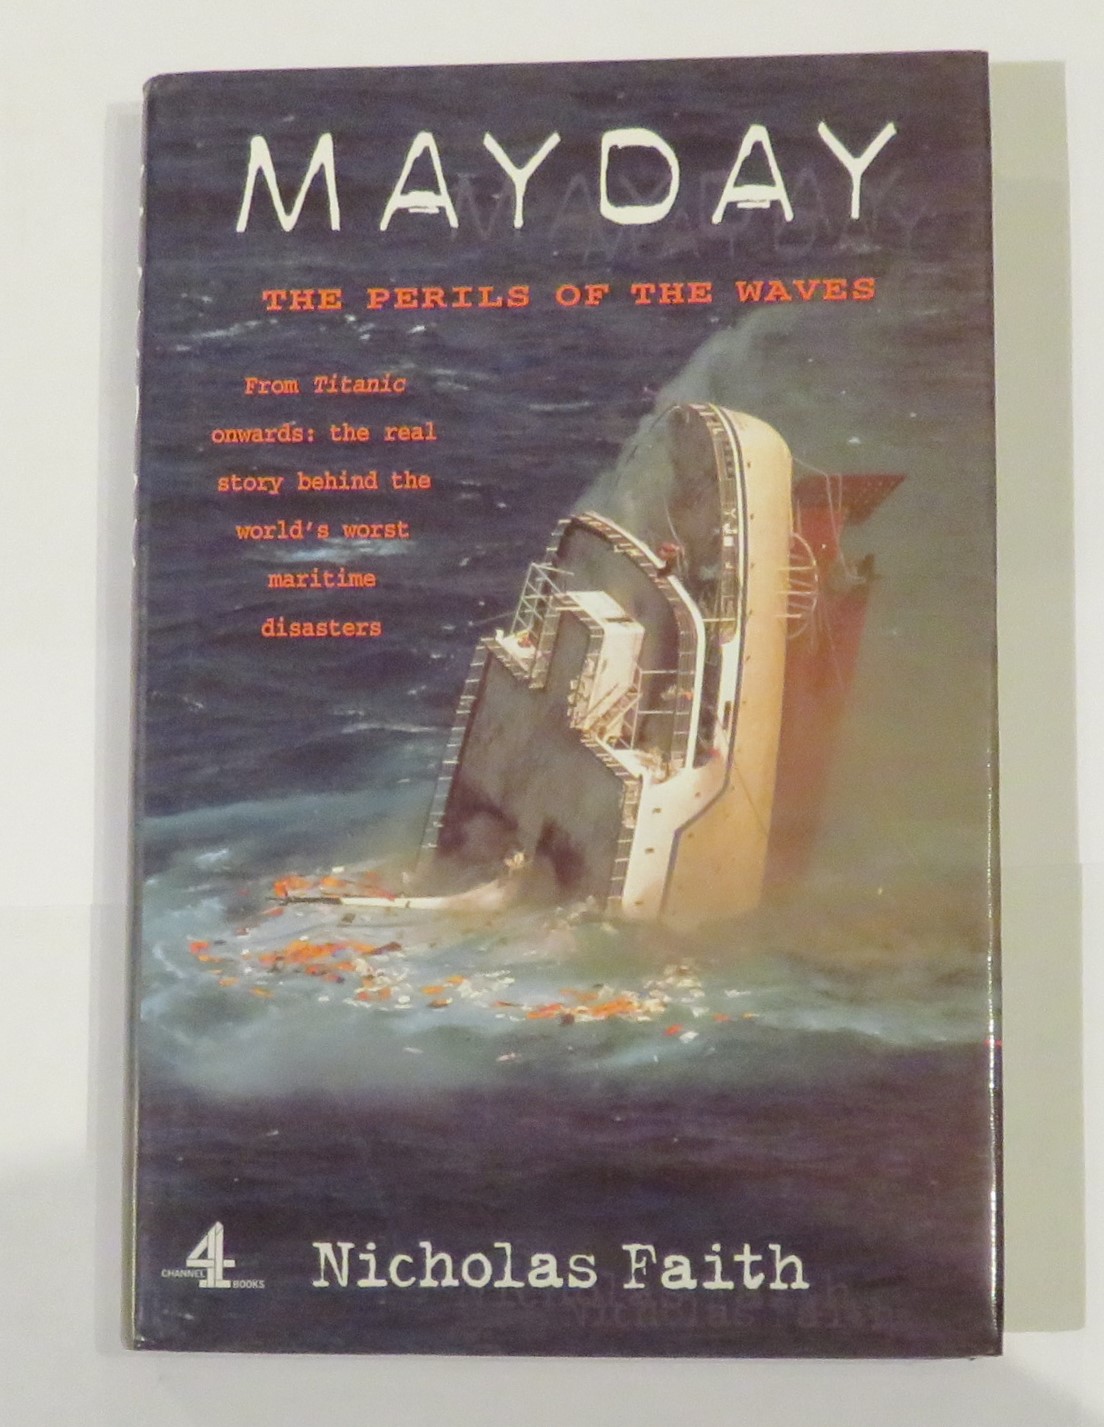 Mayday: The Perils of the Waves